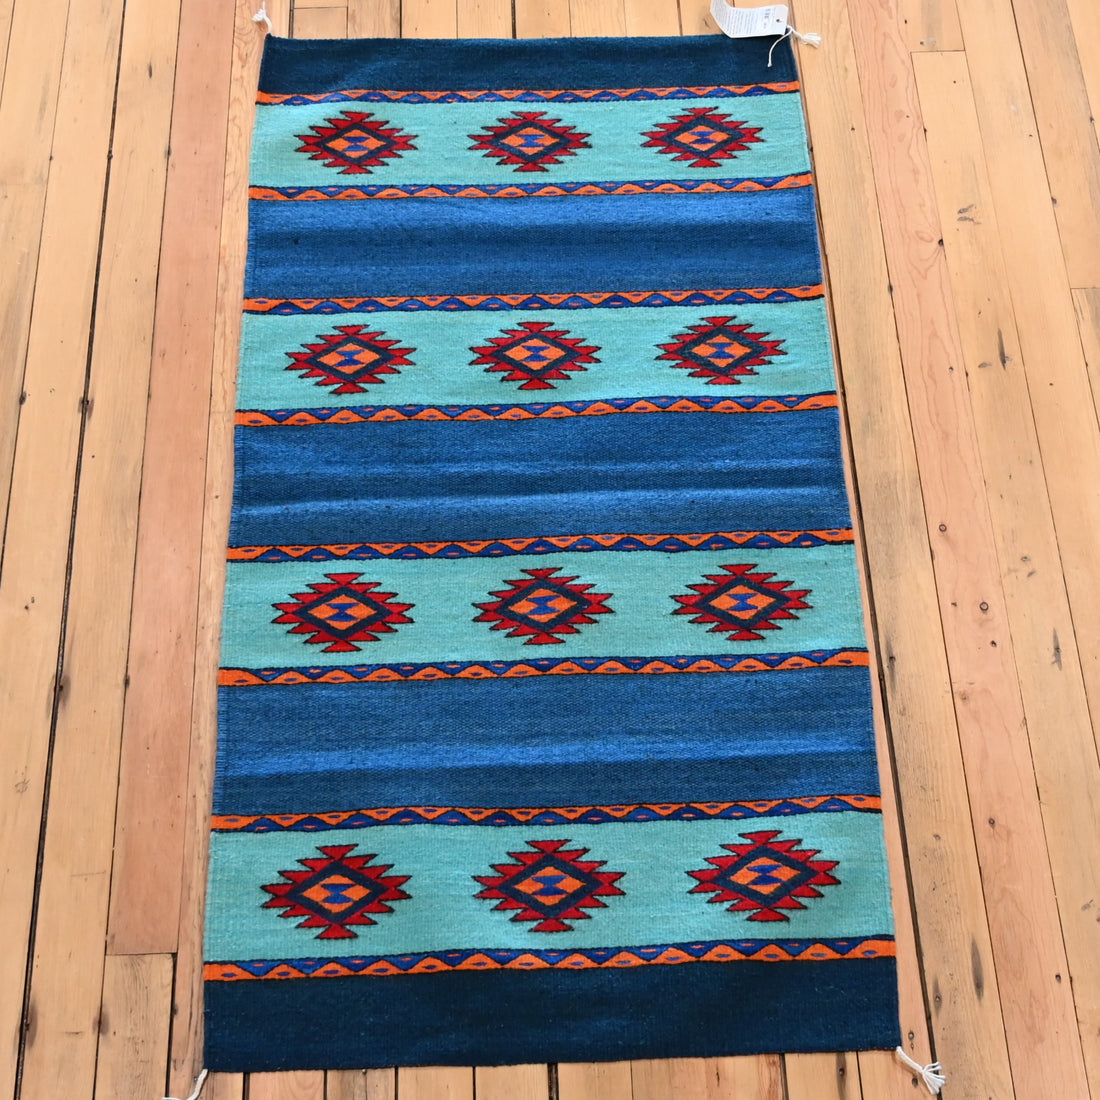 Escalante Rugs Hand Woven by Fidel Lopez view of rug